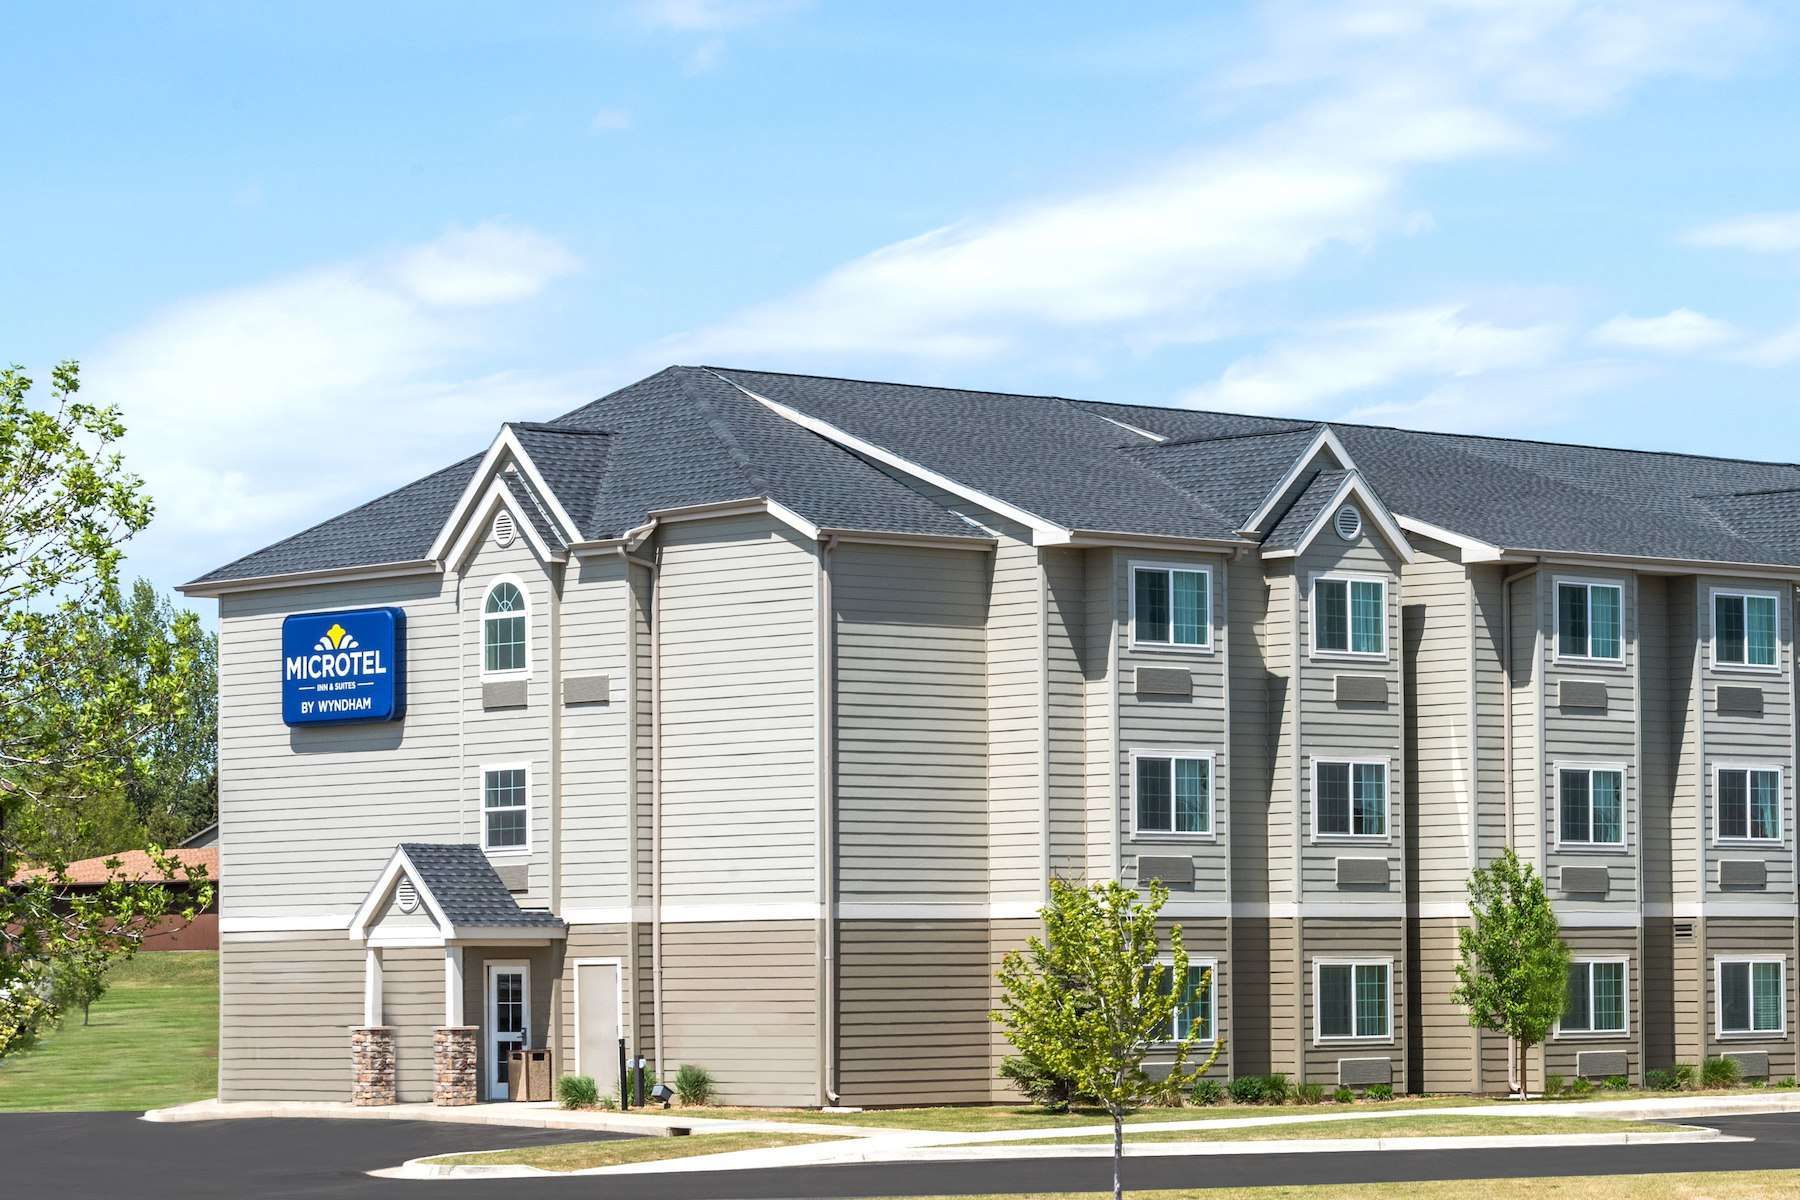 Photo of Microtel Inn & Suites by Wyndham Dickinson, Dickinson, ND